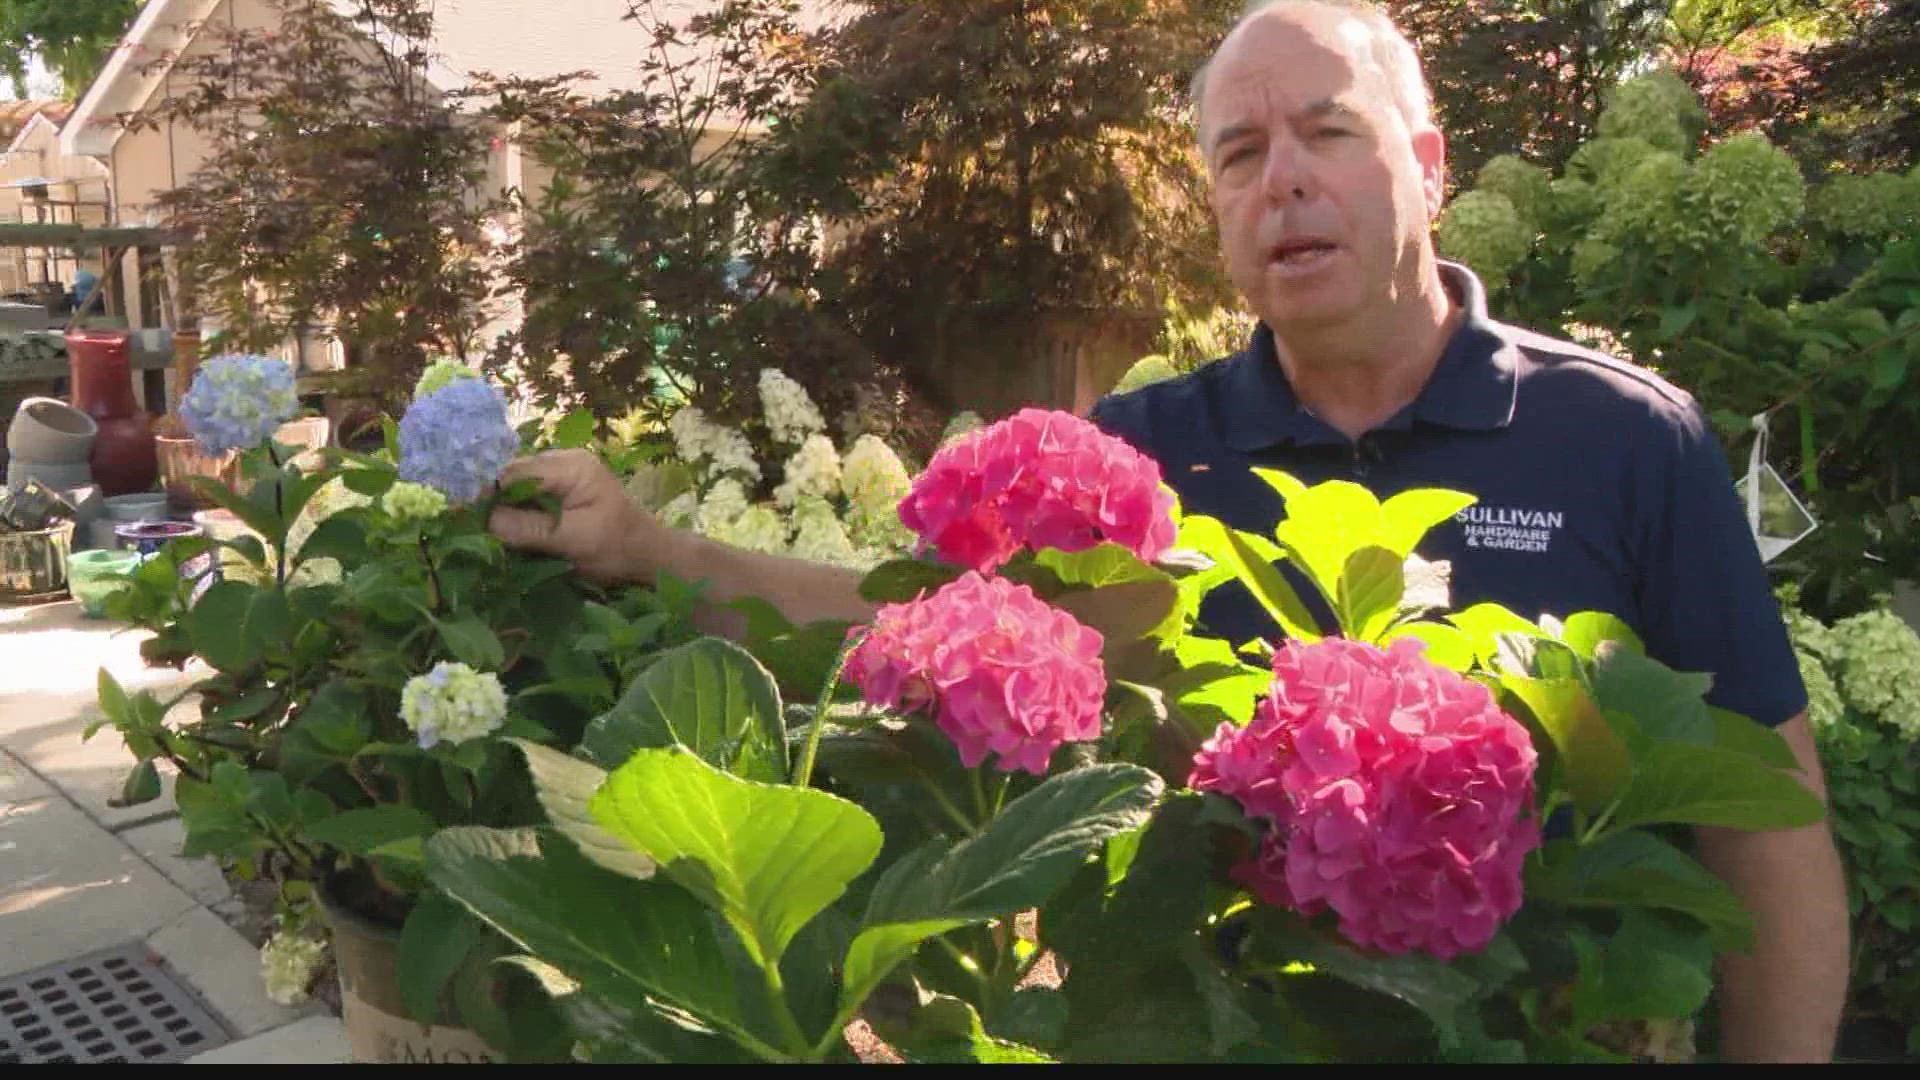 Pat Sullivan talked about hydrangeas and how to take care of them on 13Sunrise.